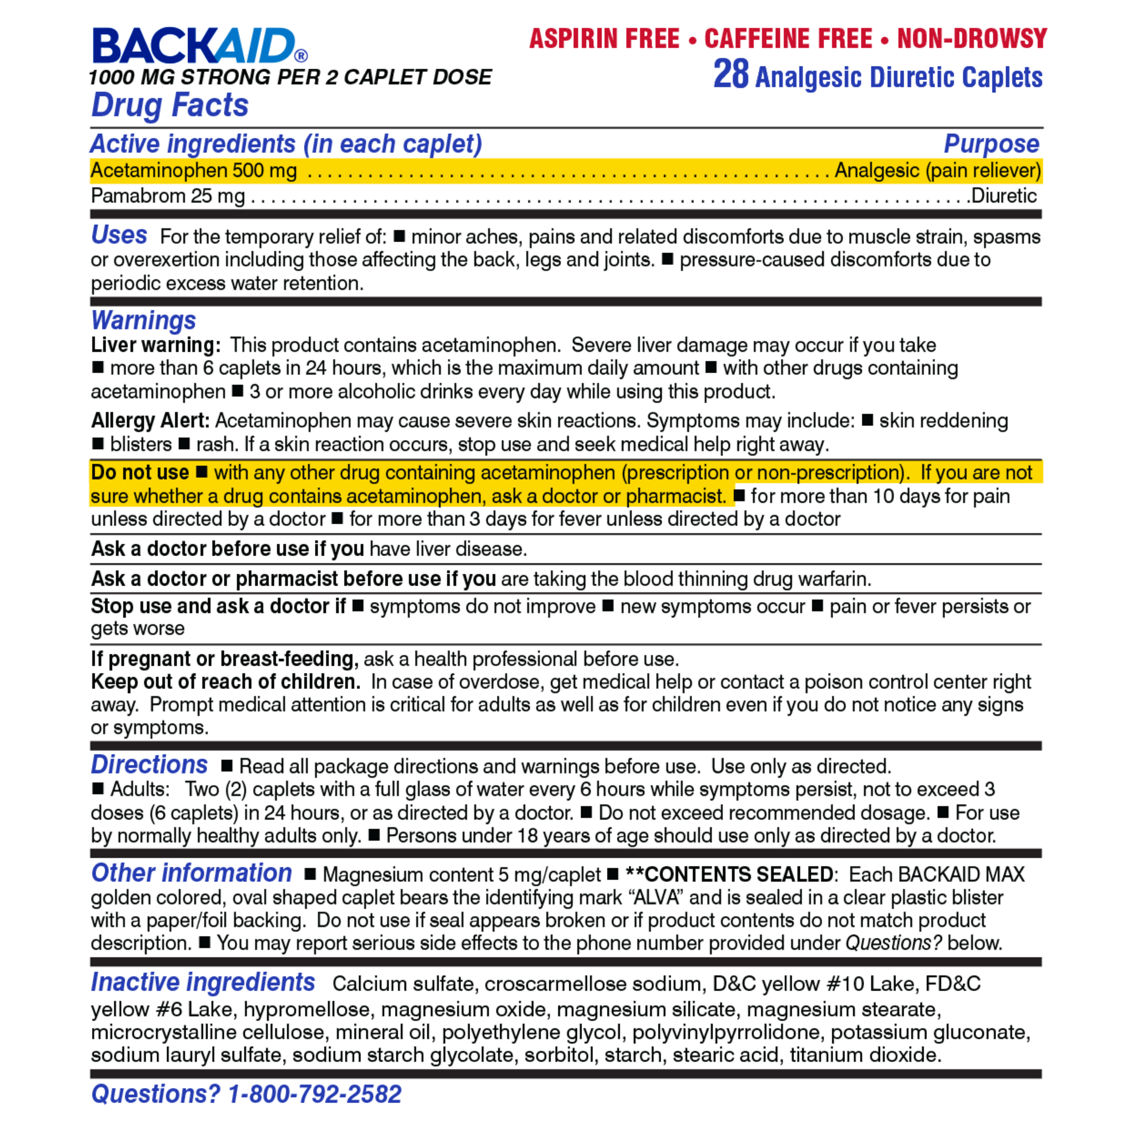 Backaid Max Pain Relief Caplets 28 ct - Image 2 of 2